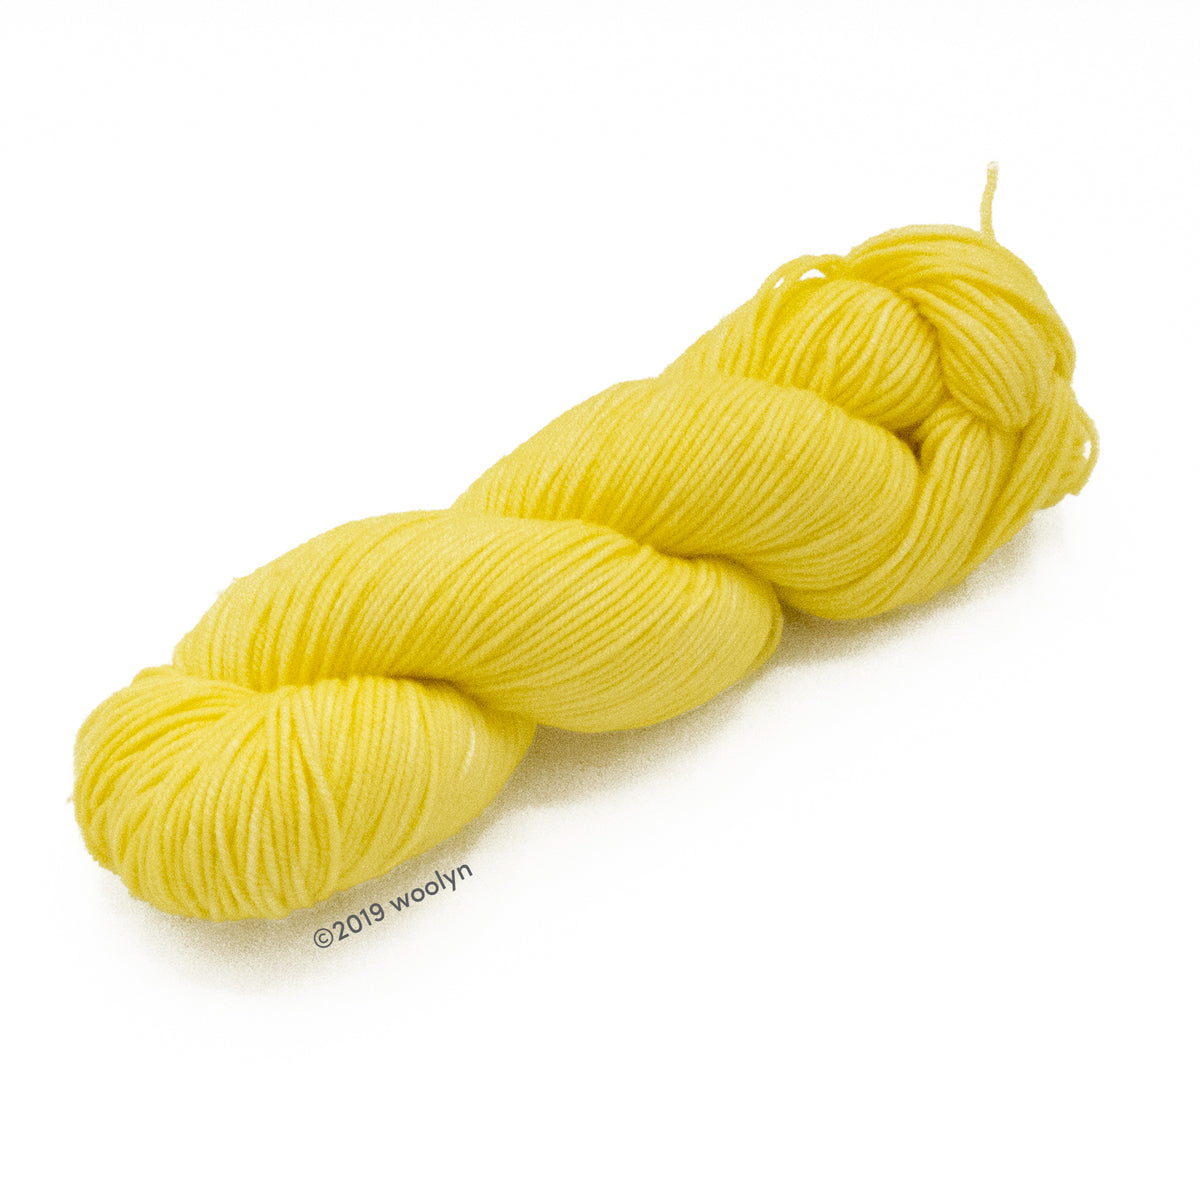 A skein of Knitted Wit Victory DK in Genteel a solid pale yellow color.